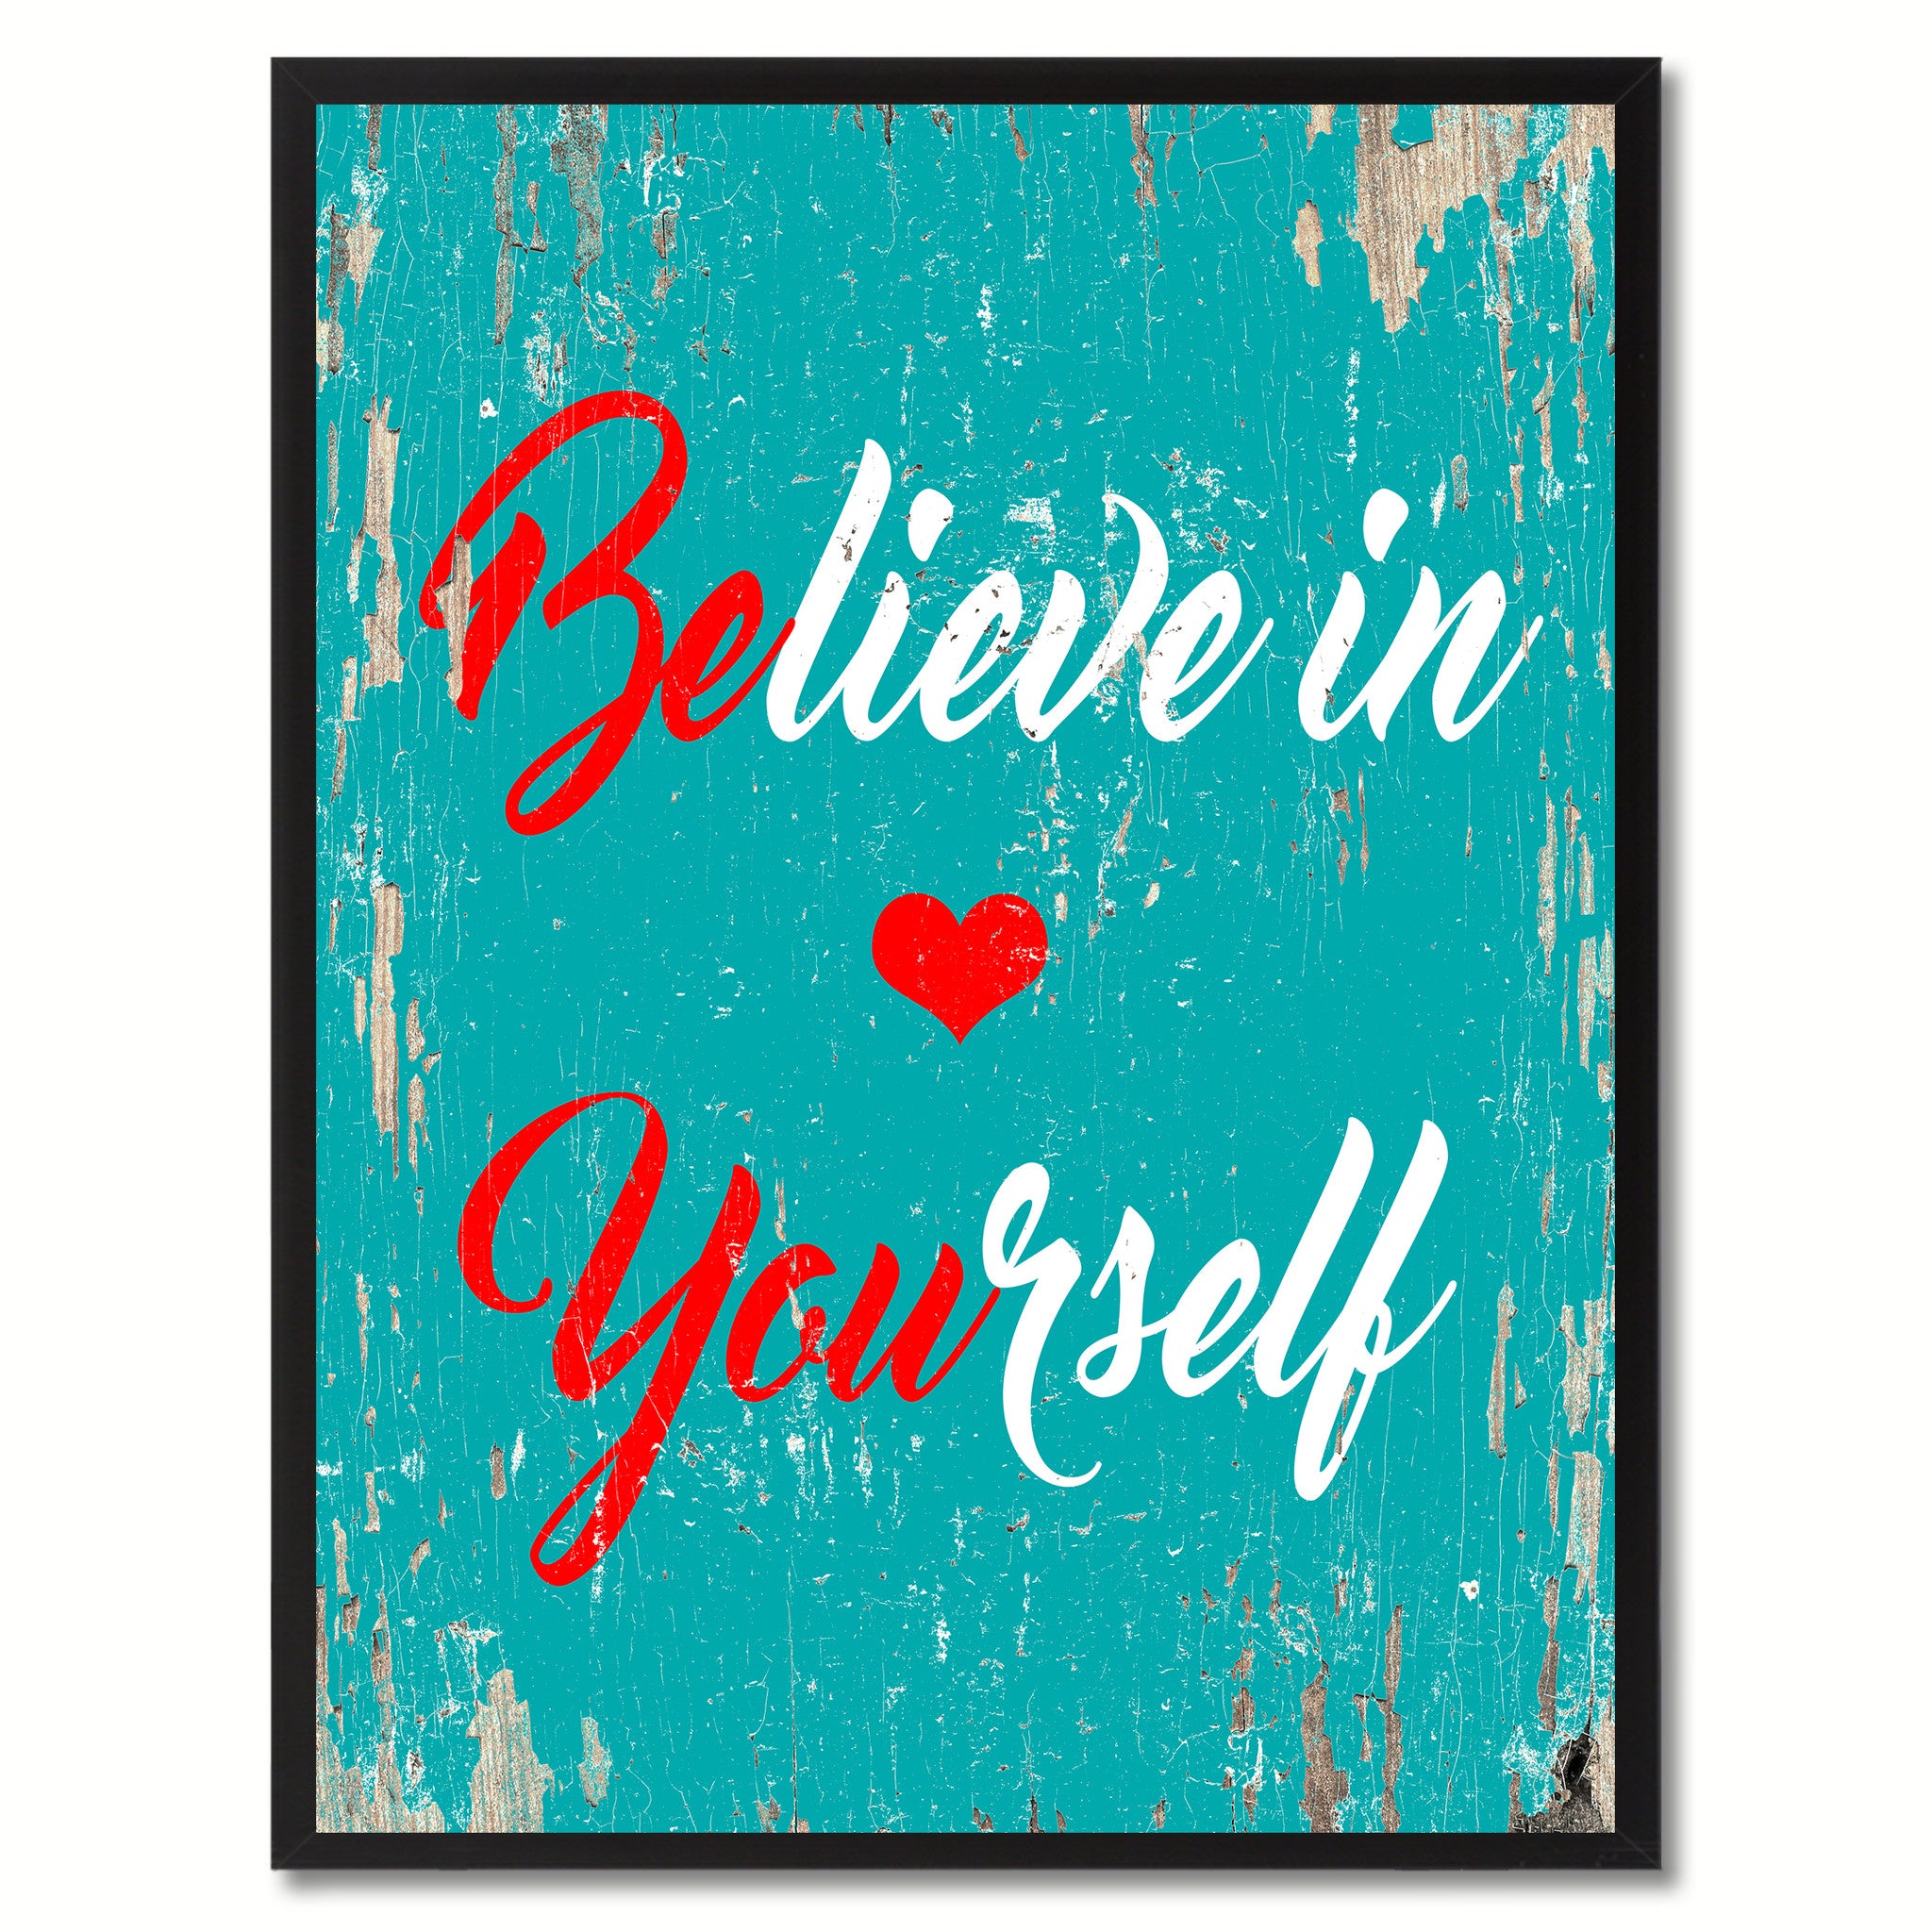 Believe in yourself Inspirational Quote Saying Gift Ideas Home Decor Wall Art